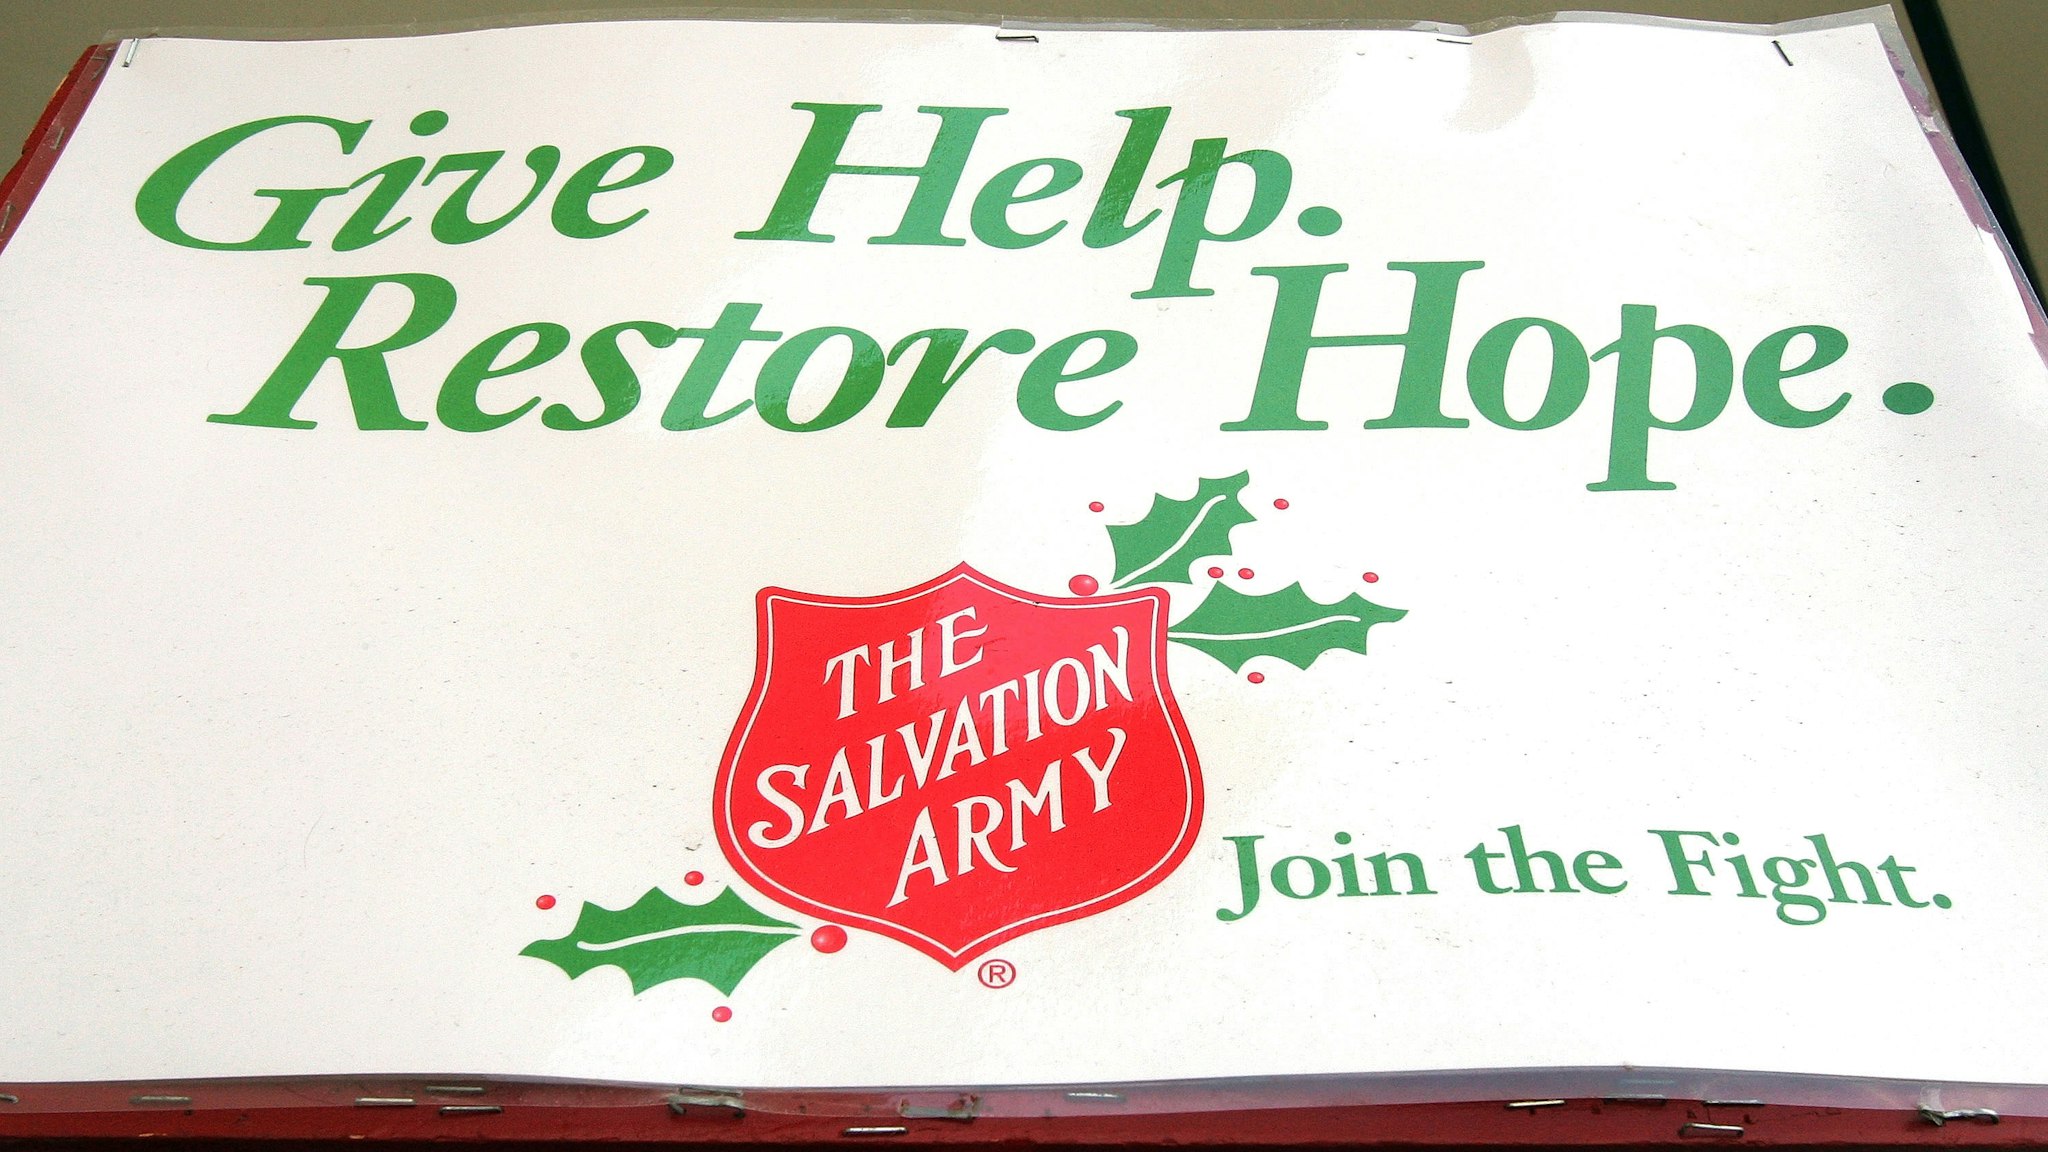 CHICAGO - DECEMBER 2: The Salvation Army creed is seen on a bell ringer's pole in front of a Kmart store December 2, 2004 in Chicago, Illinois. Several major national retailers have banned Salvation Army bell ringers, including Target stores.